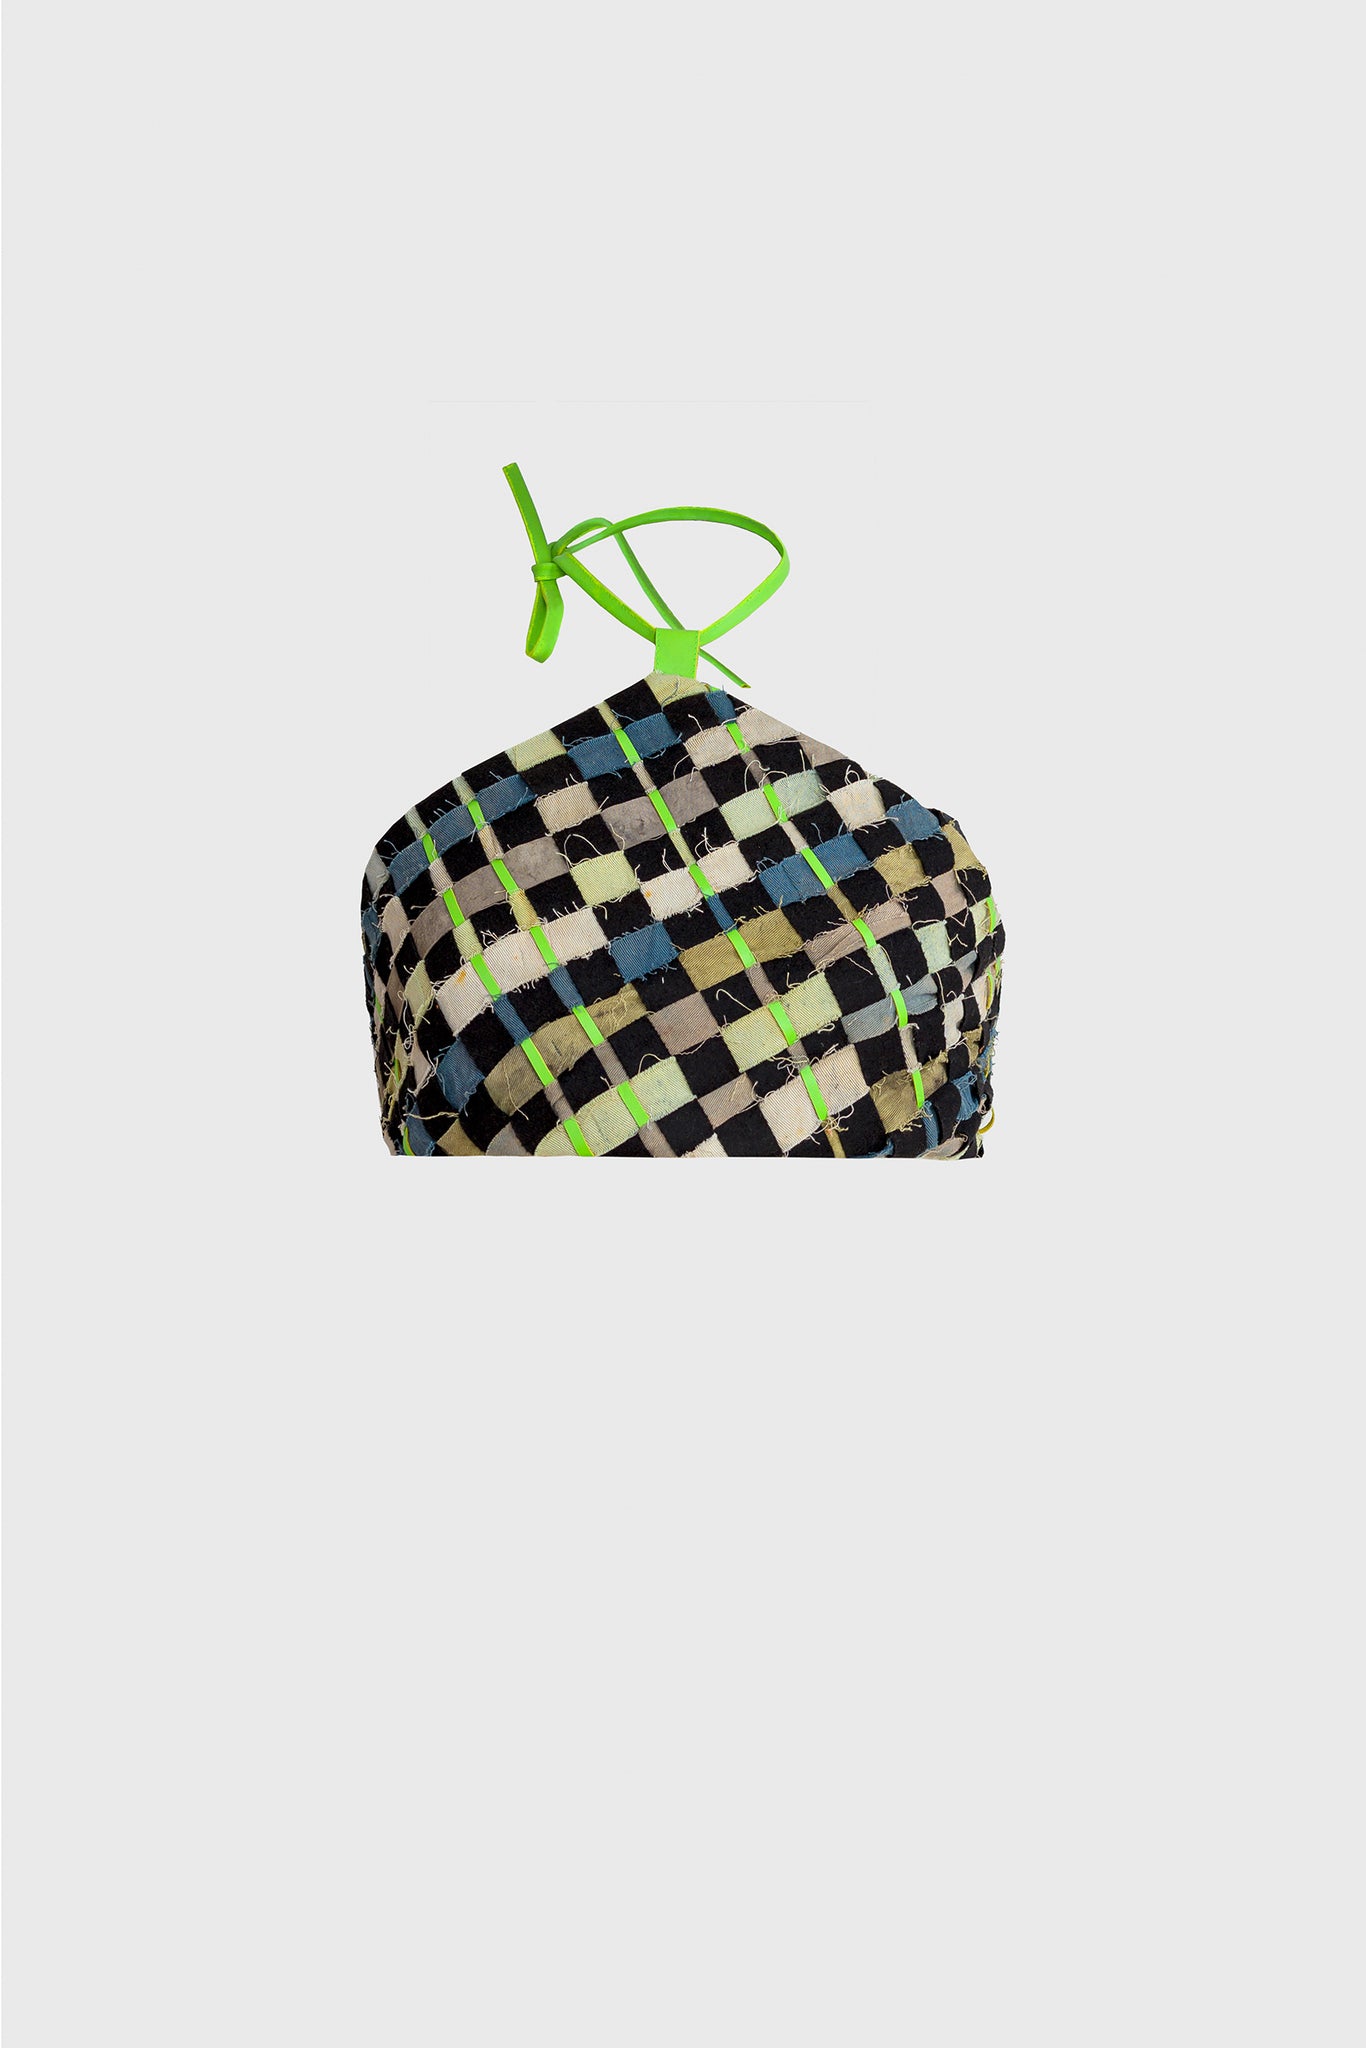 Woven bustier top, checkered multicolor patter, green and blue hades, leather cord around the neck, elastic back bands fits multiple sizes, pop up fashion, perfect way to start the summer, sexy luxury style, young and vibrant